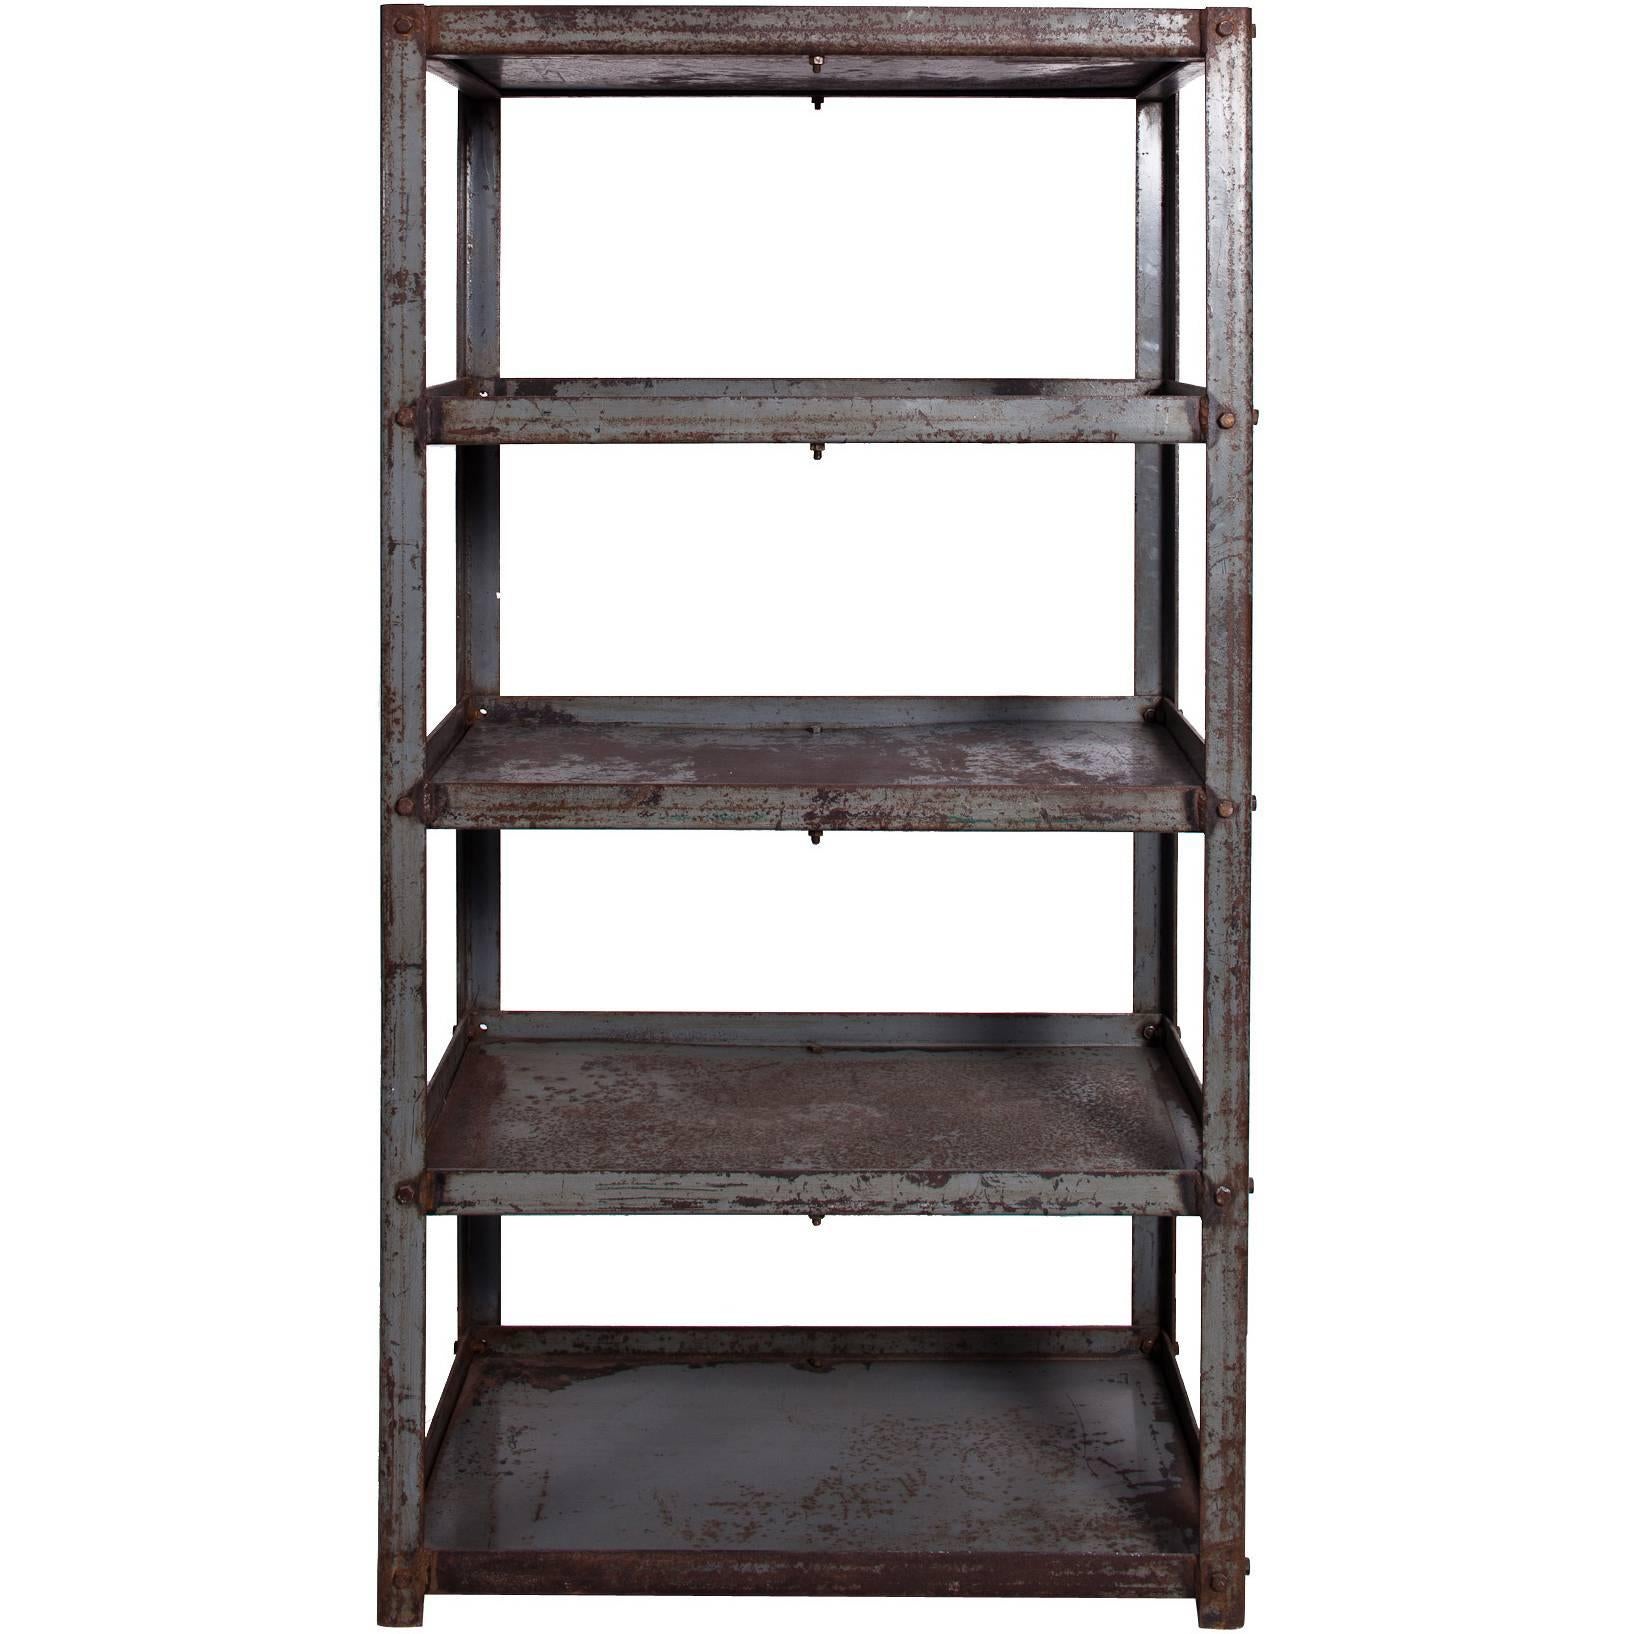 Early 20th Century Metal Shelves from a Textile Factory in England For Sale